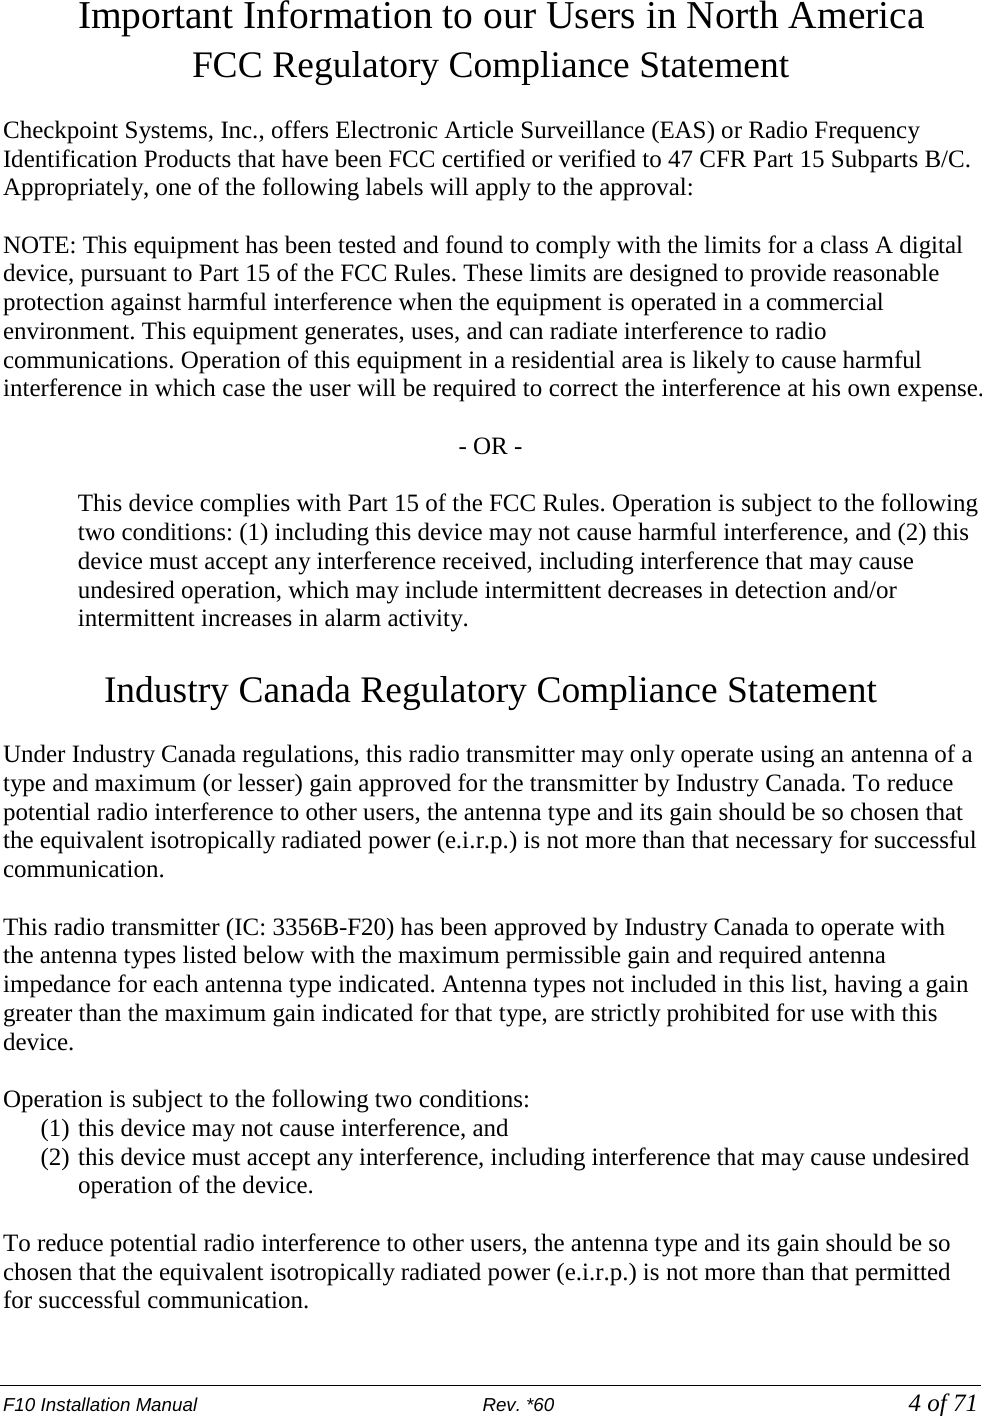 F10 Installation Manual                          Rev. *60            4 of 71 Important Information to our Users in North America FCC Regulatory Compliance Statement  Checkpoint Systems, Inc., offers Electronic Article Surveillance (EAS) or Radio Frequency Identification Products that have been FCC certified or verified to 47 CFR Part 15 Subparts B/C. Appropriately, one of the following labels will apply to the approval:  NOTE: This equipment has been tested and found to comply with the limits for a class A digital device, pursuant to Part 15 of the FCC Rules. These limits are designed to provide reasonable protection against harmful interference when the equipment is operated in a commercial environment. This equipment generates, uses, and can radiate interference to radio communications. Operation of this equipment in a residential area is likely to cause harmful interference in which case the user will be required to correct the interference at his own expense.  - OR -  This device complies with Part 15 of the FCC Rules. Operation is subject to the following two conditions: (1) including this device may not cause harmful interference, and (2) this device must accept any interference received, including interference that may cause undesired operation, which may include intermittent decreases in detection and/or intermittent increases in alarm activity.   Industry Canada Regulatory Compliance Statement  Under Industry Canada regulations, this radio transmitter may only operate using an antenna of a type and maximum (or lesser) gain approved for the transmitter by Industry Canada. To reduce potential radio interference to other users, the antenna type and its gain should be so chosen that the equivalent isotropically radiated power (e.i.r.p.) is not more than that necessary for successful communication.  This radio transmitter (IC: 3356B-F20) has been approved by Industry Canada to operate with the antenna types listed below with the maximum permissible gain and required antenna impedance for each antenna type indicated. Antenna types not included in this list, having a gain greater than the maximum gain indicated for that type, are strictly prohibited for use with this device.  Operation is subject to the following two conditions:  (1) this device may not cause interference, and  (2) this device must accept any interference, including interference that may cause undesired operation of the device.  To reduce potential radio interference to other users, the antenna type and its gain should be so chosen that the equivalent isotropically radiated power (e.i.r.p.) is not more than that permitted for successful communication. 